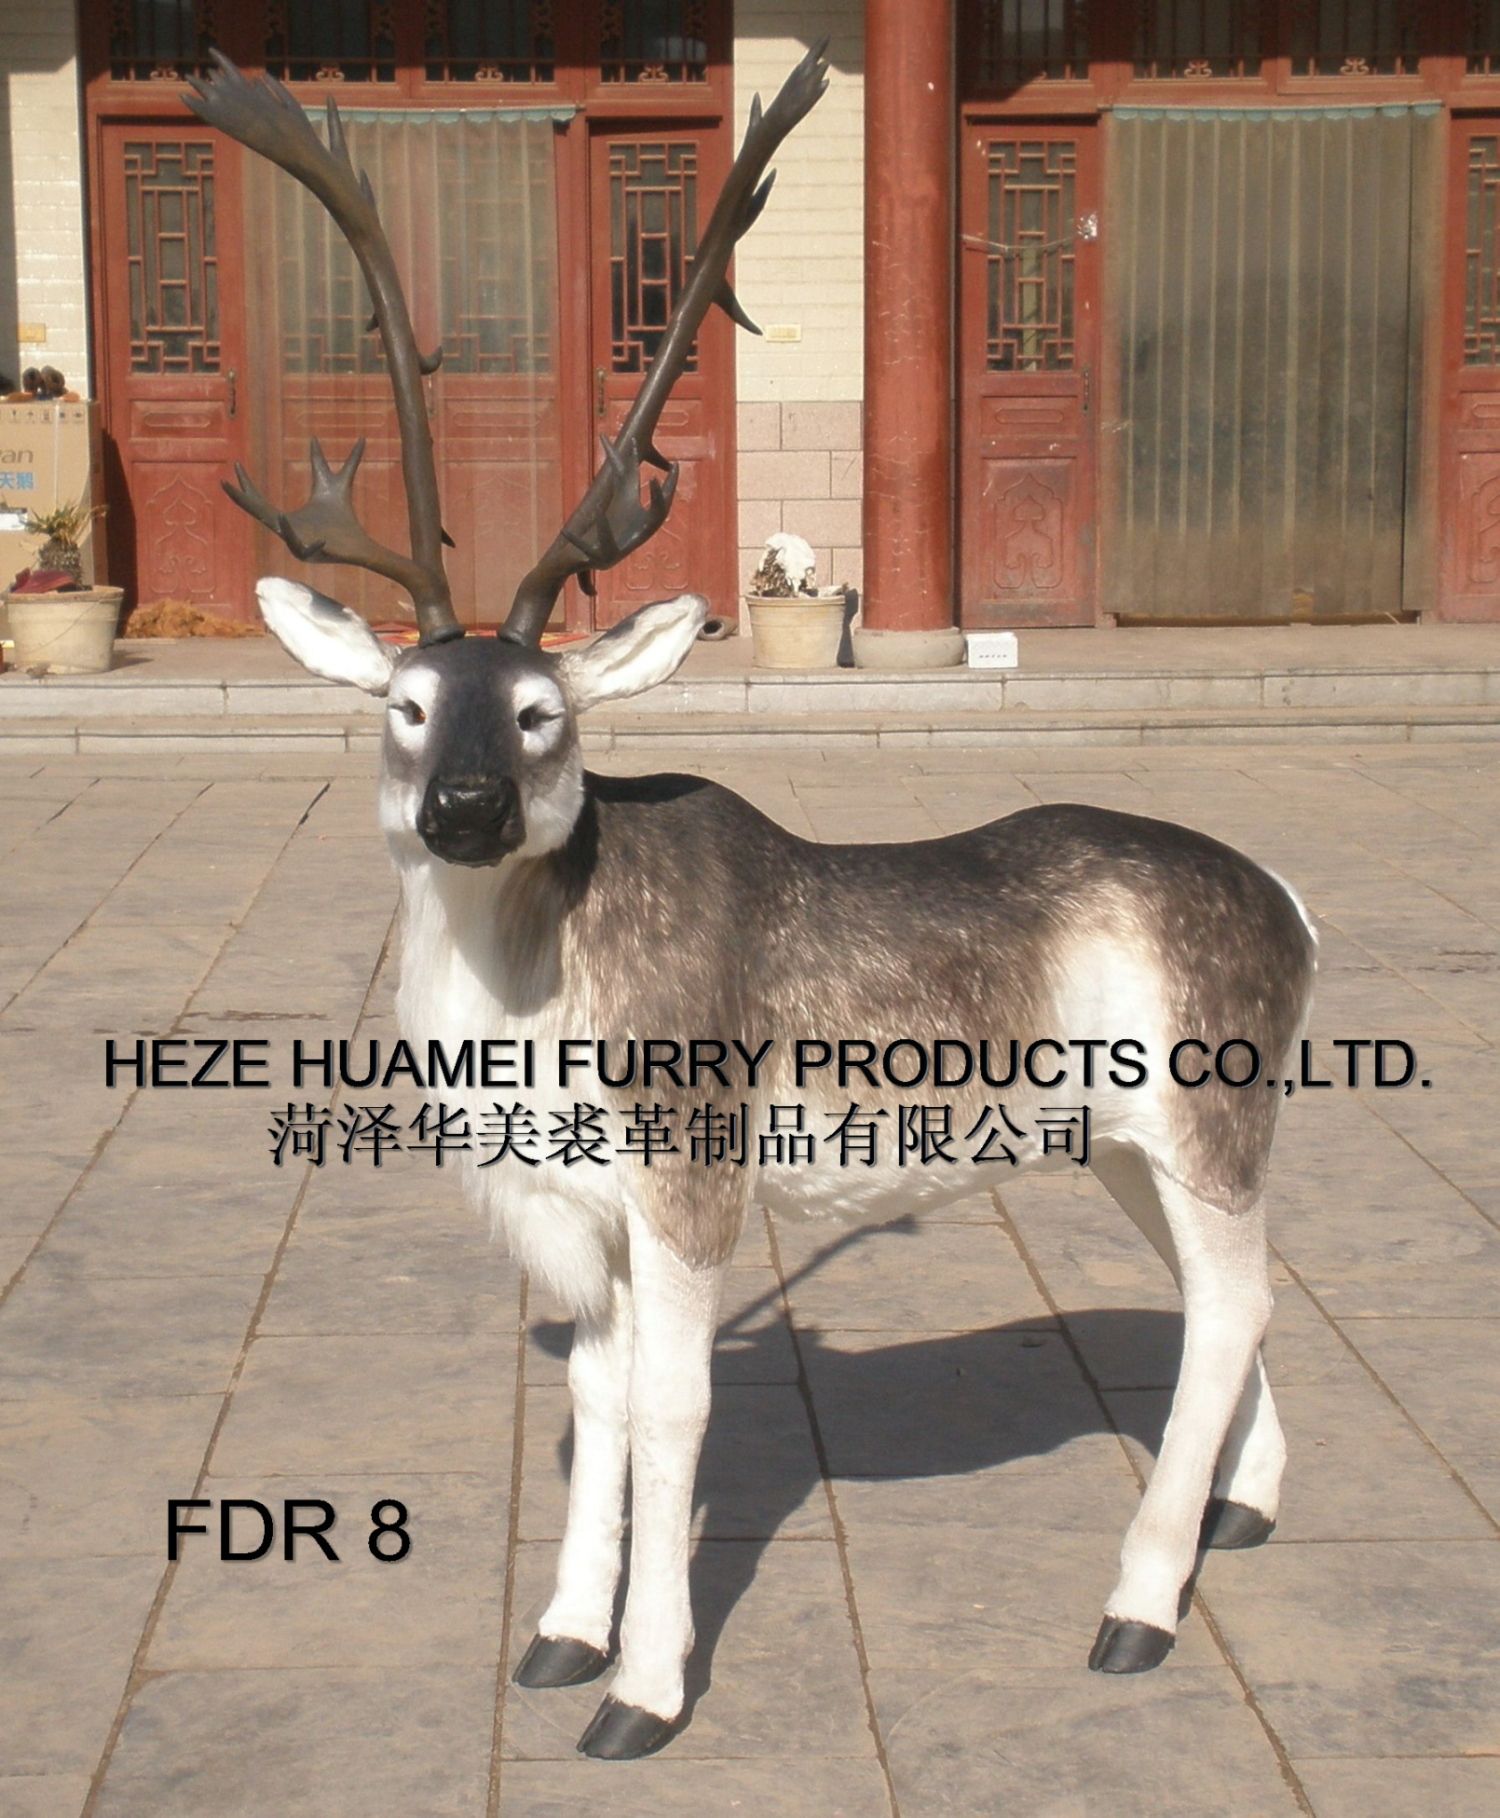 FDR 8,HEZE YUHANG FURRY PRODUCTS CO., LTD.